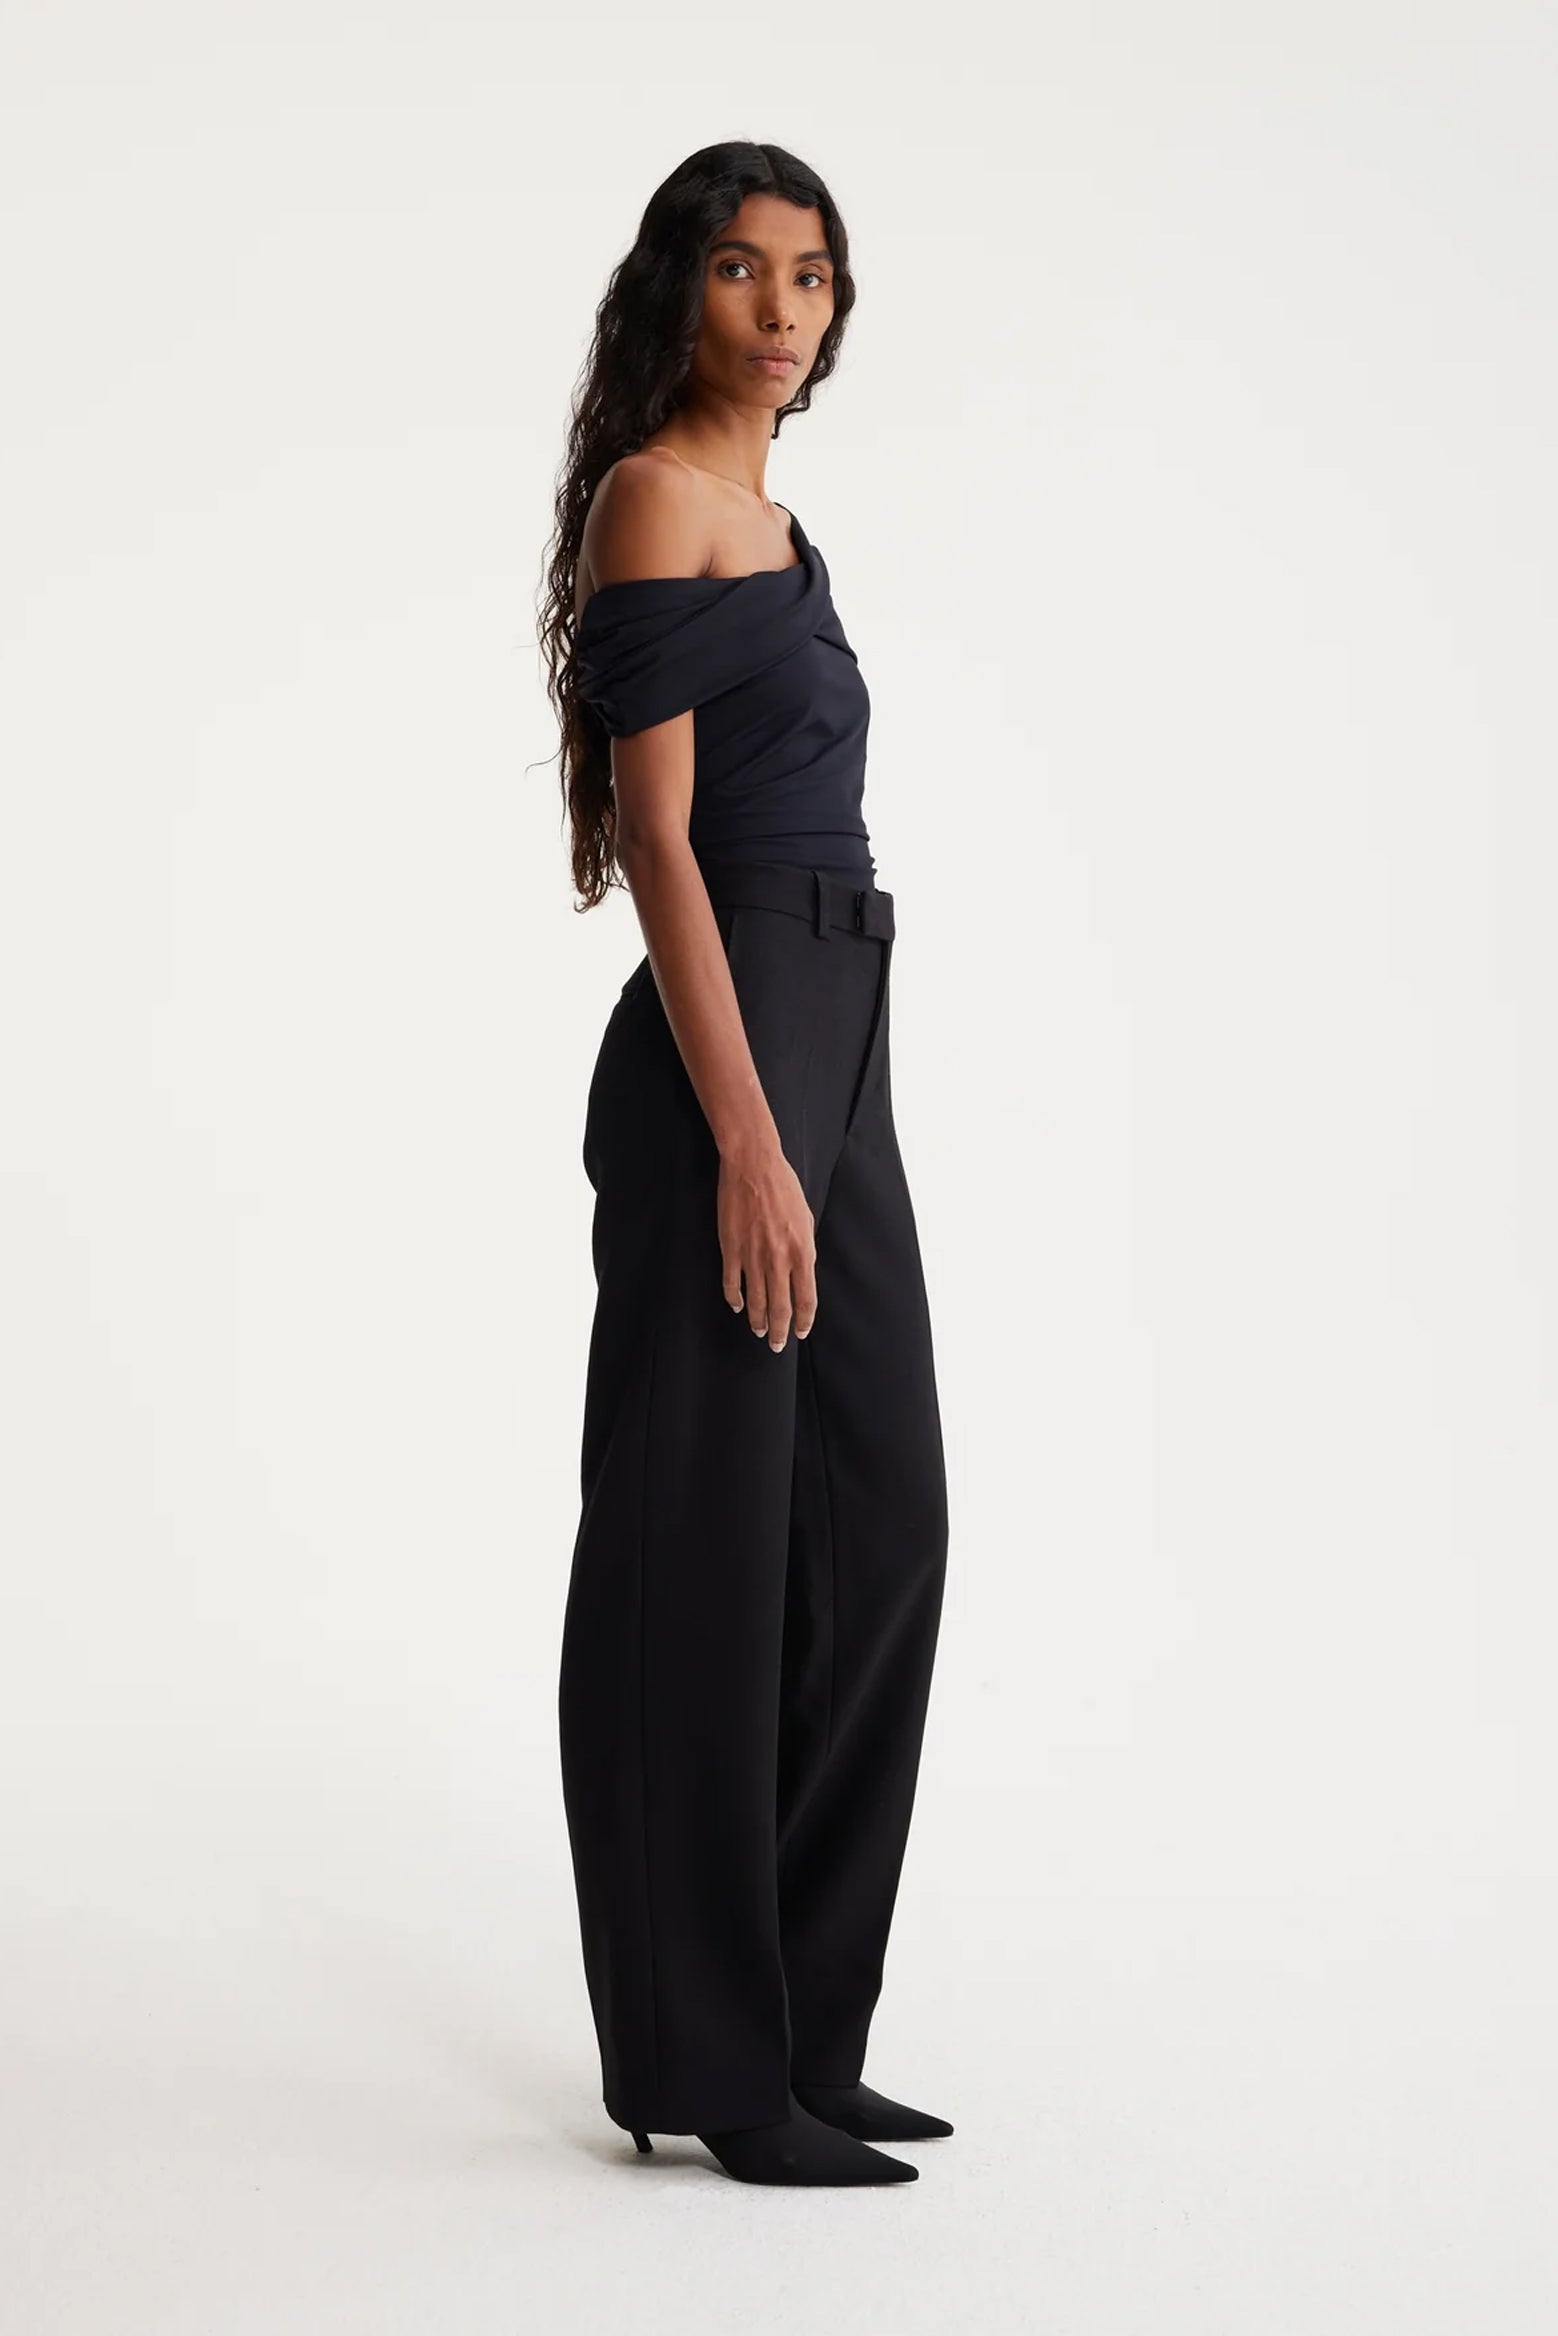 ROHE Asymmetrical Off Shoulder Top in Noir available at The New Trend Australia.